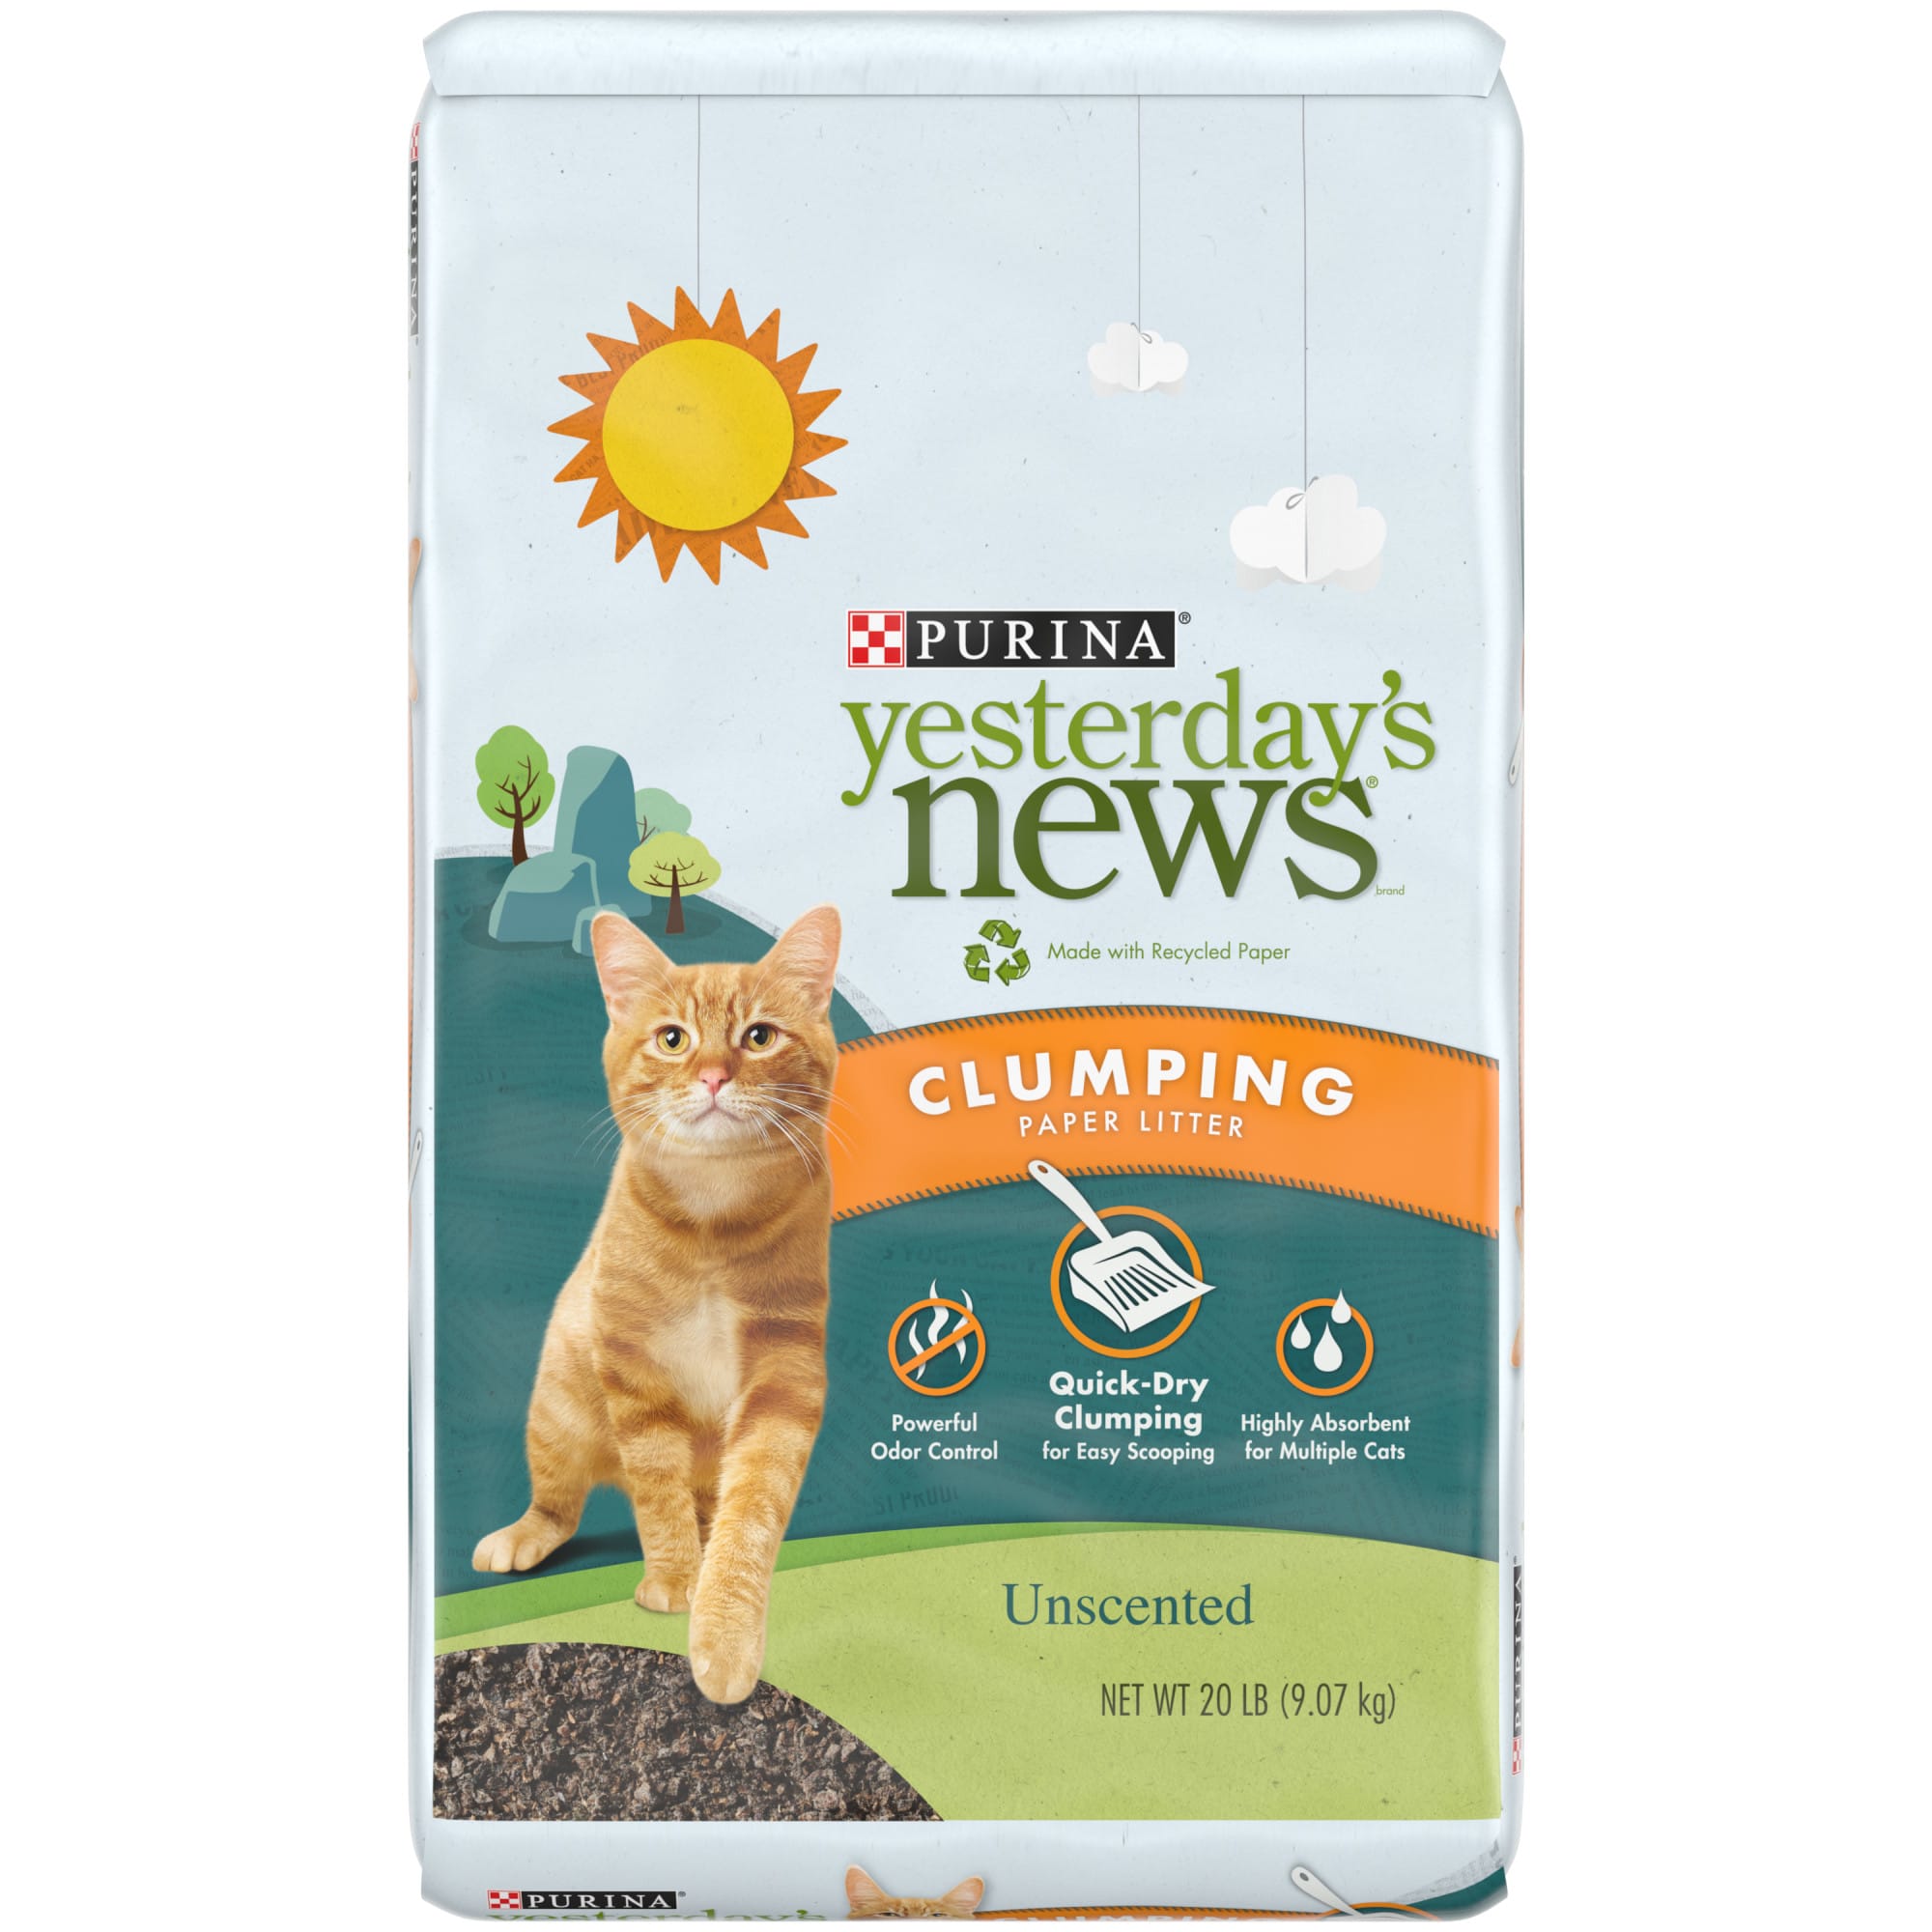 Purina Yesterday's News Unscented Clumping Paper Lightweight Multi Cat